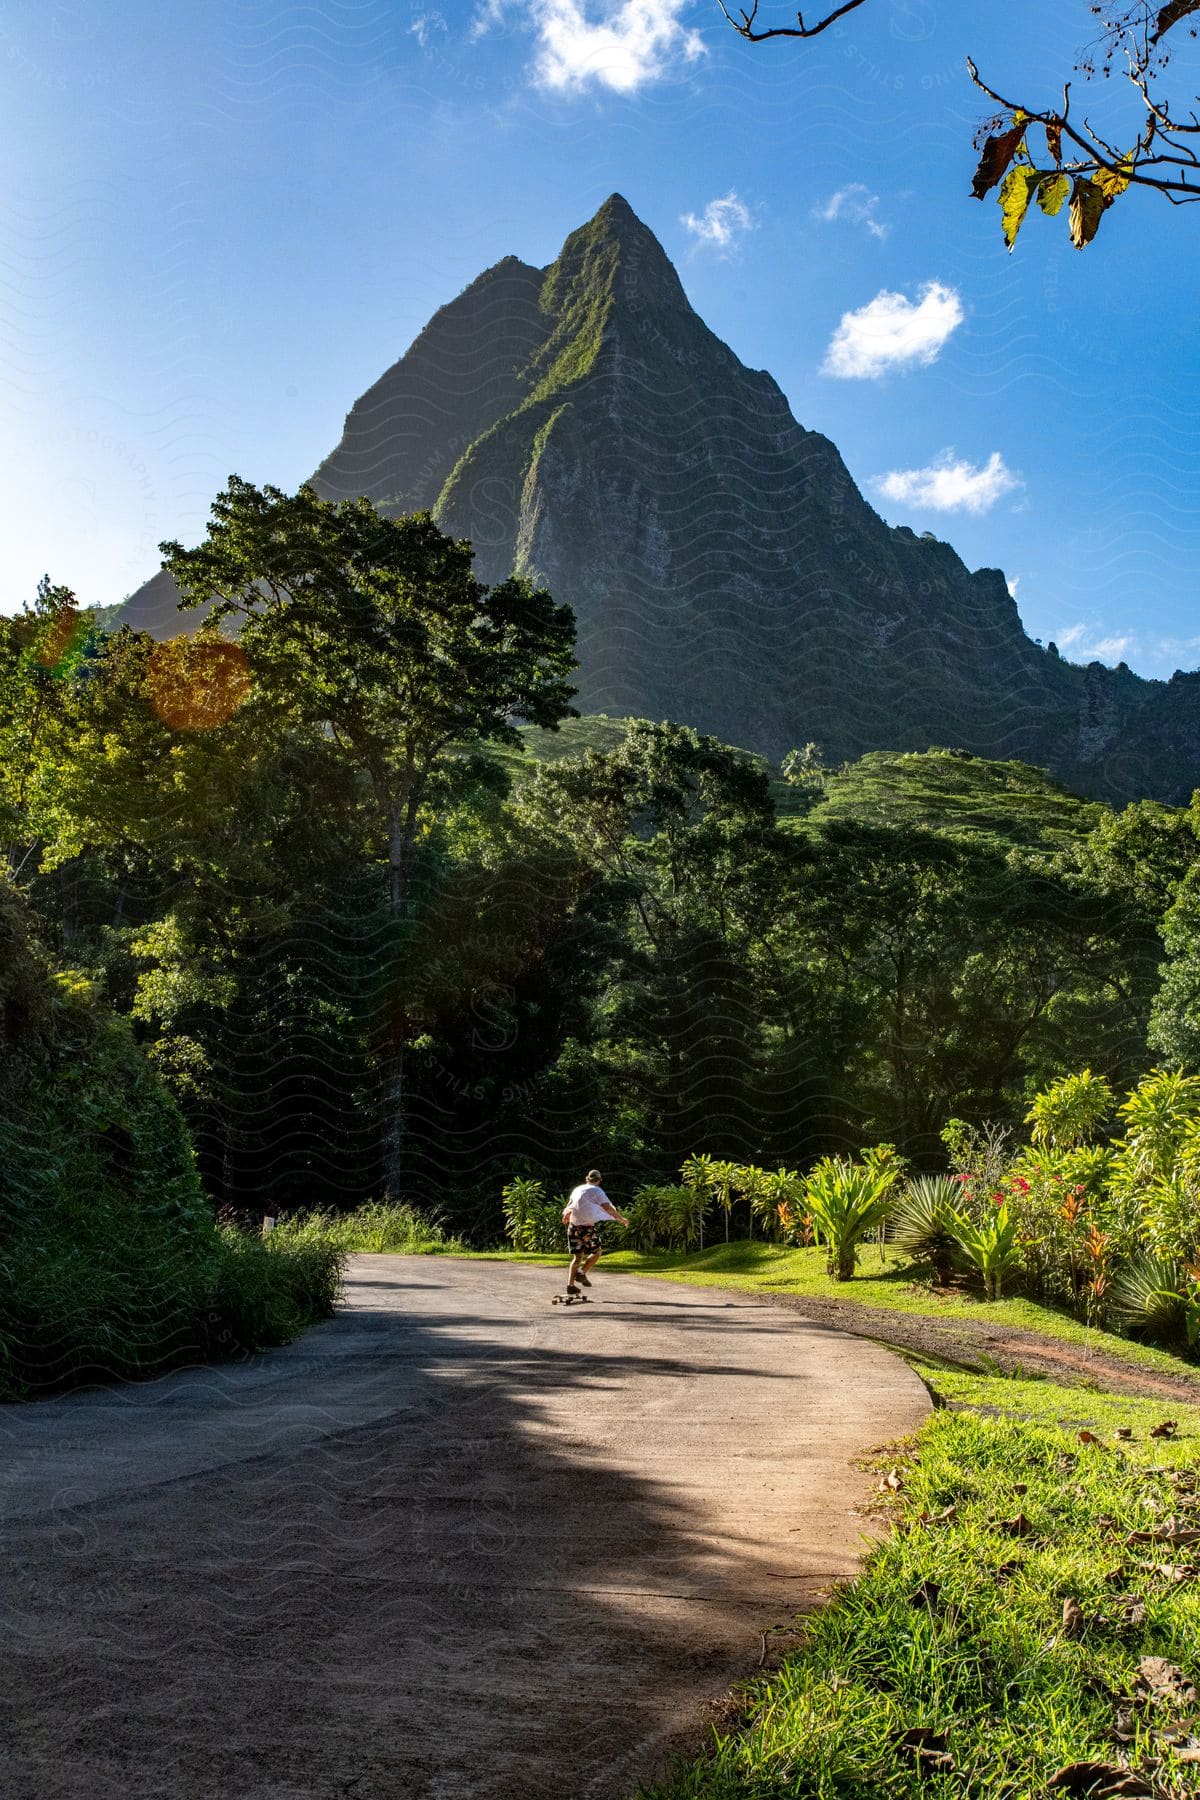 A person is riding a skateboard on a street surrounded by vegetation and trees and in the background there is a huge mountain